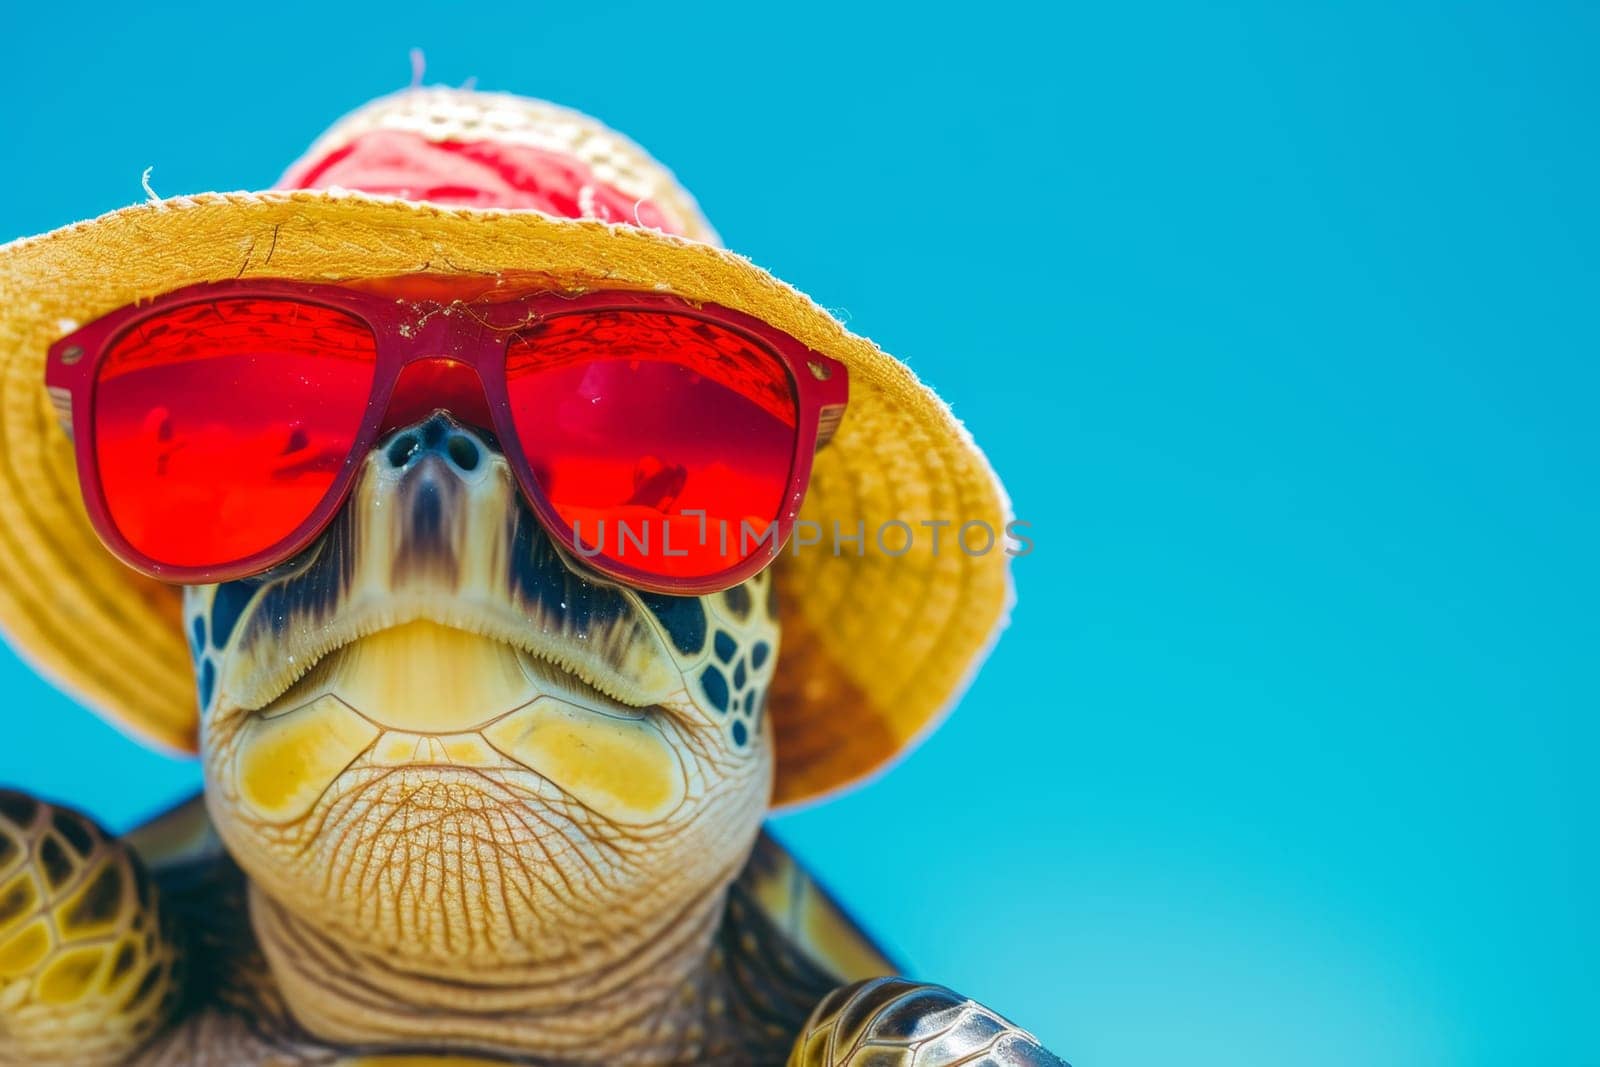 A turtle wearing glasses and a hat is relaxing on a tropical beach.